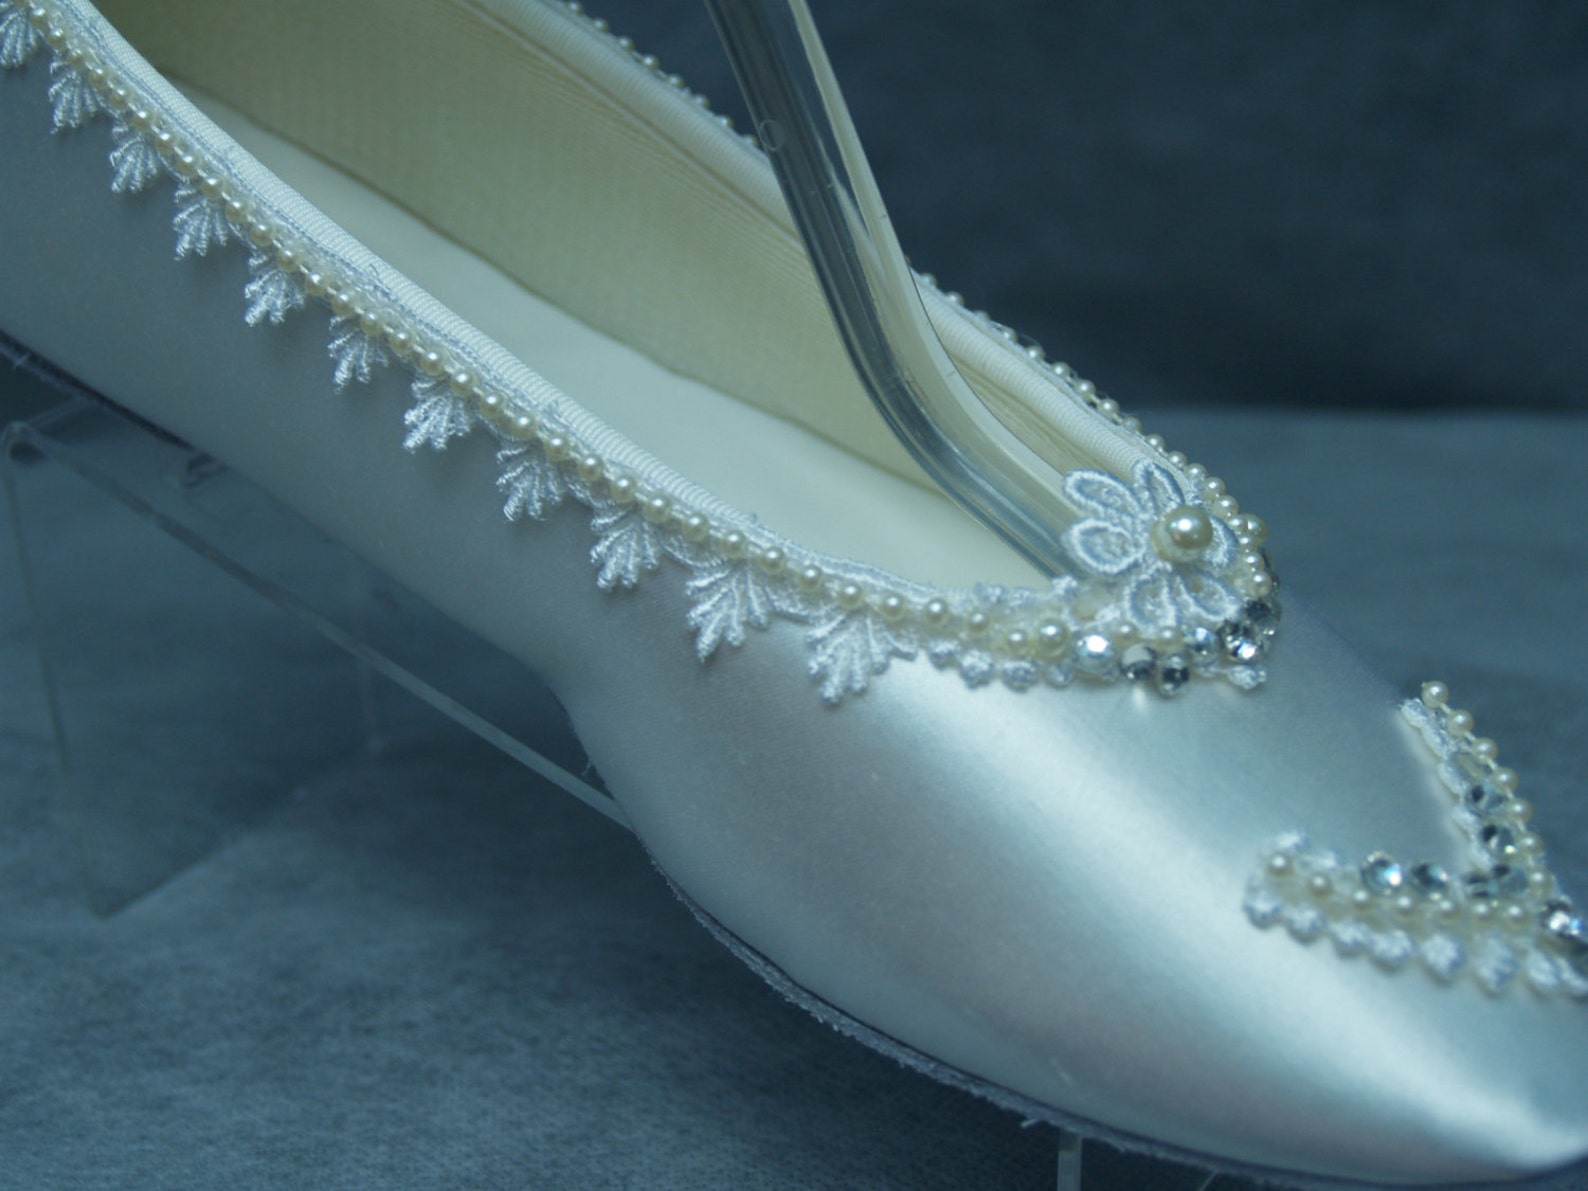 bridal victorian flats white shoes fine us lace pearls and crystals embellished,wedding flat shoes victorian, satin ballet style